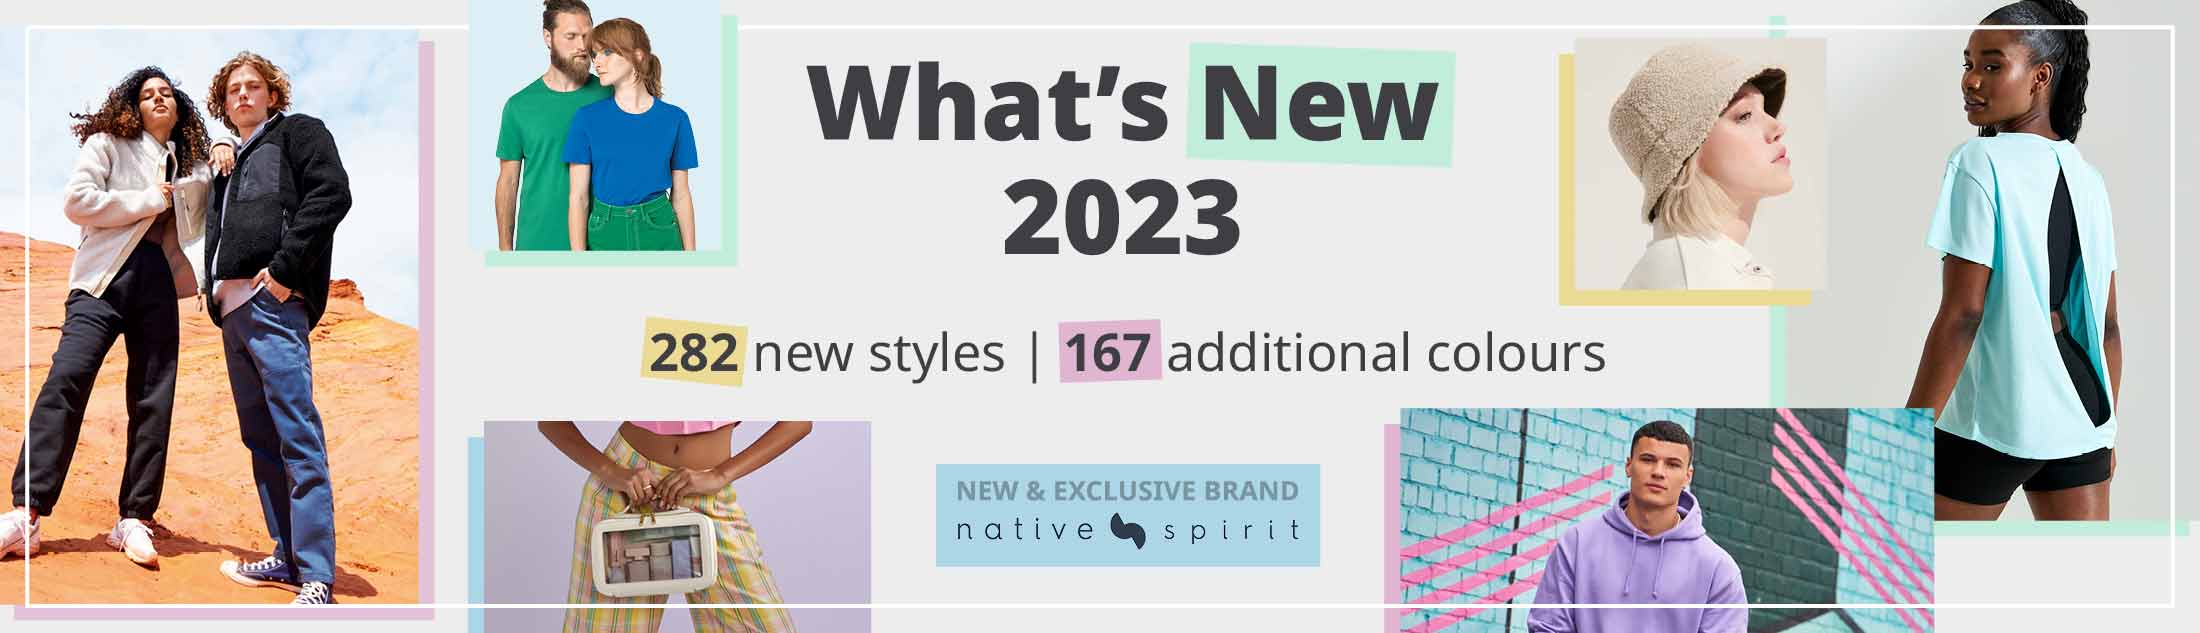 NEW styles for 2023